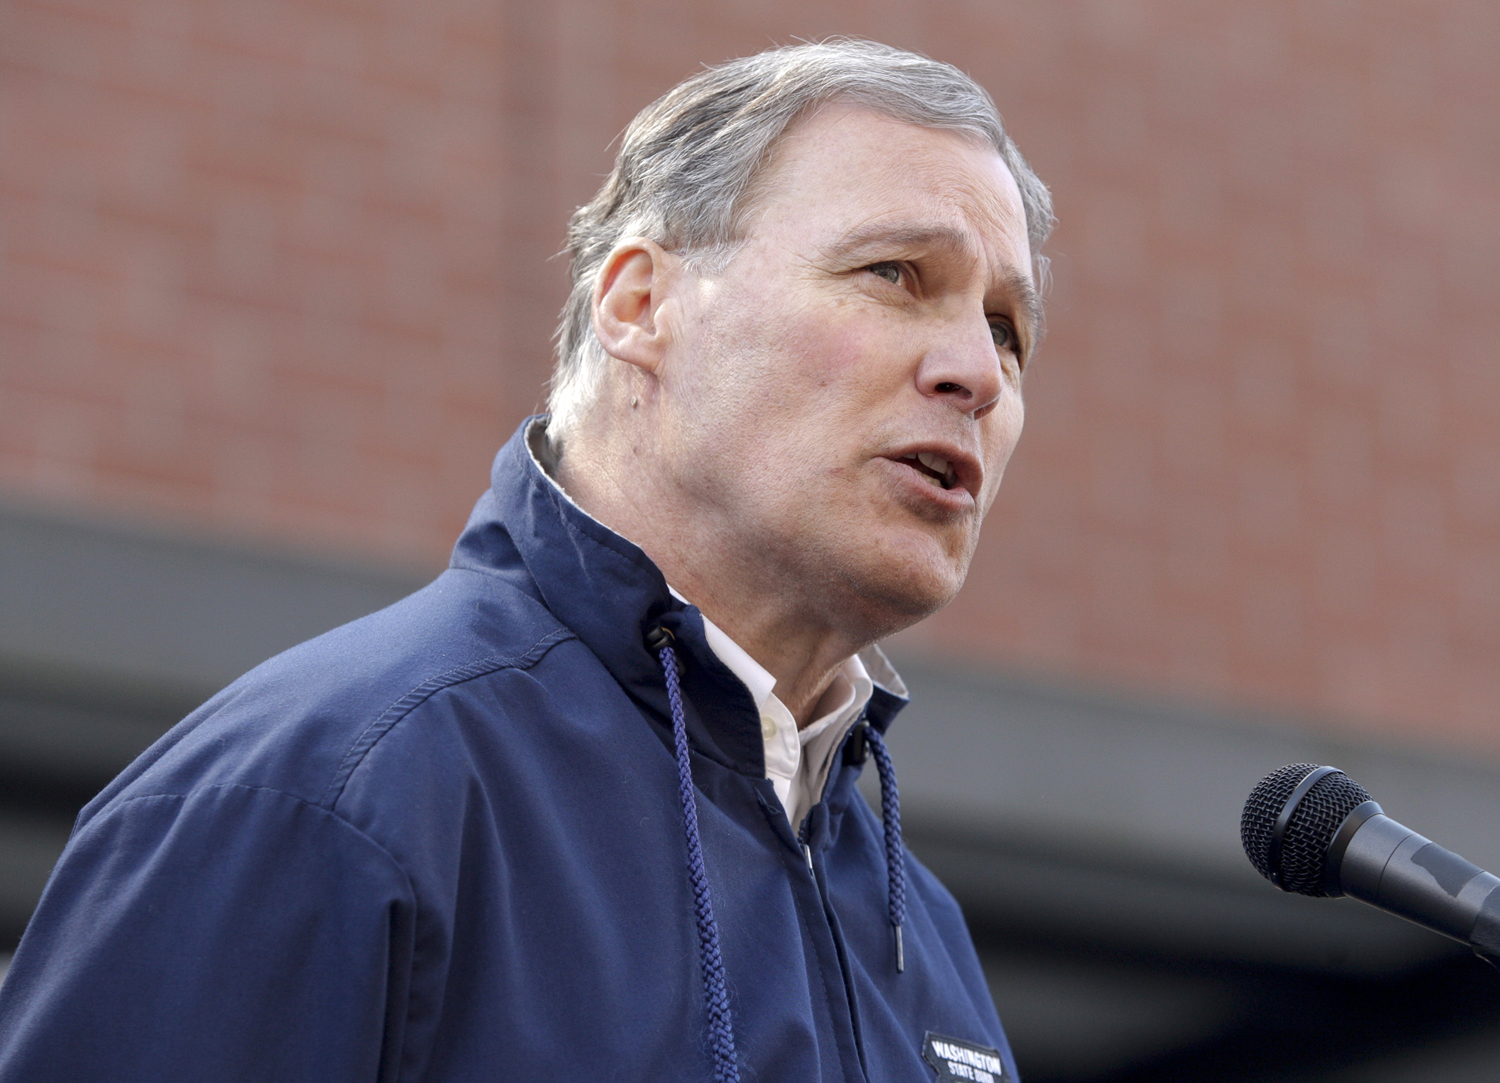 Washington Governor Jay Inslee wrote President Barack Obama on Tuesday to ask for more federal assistance for his disaster struck state. (Reuters Washington Governor Jay Inslee wrote President Barack Obama on Tuesday to ask for more federal assistance for his disaster struck state.)